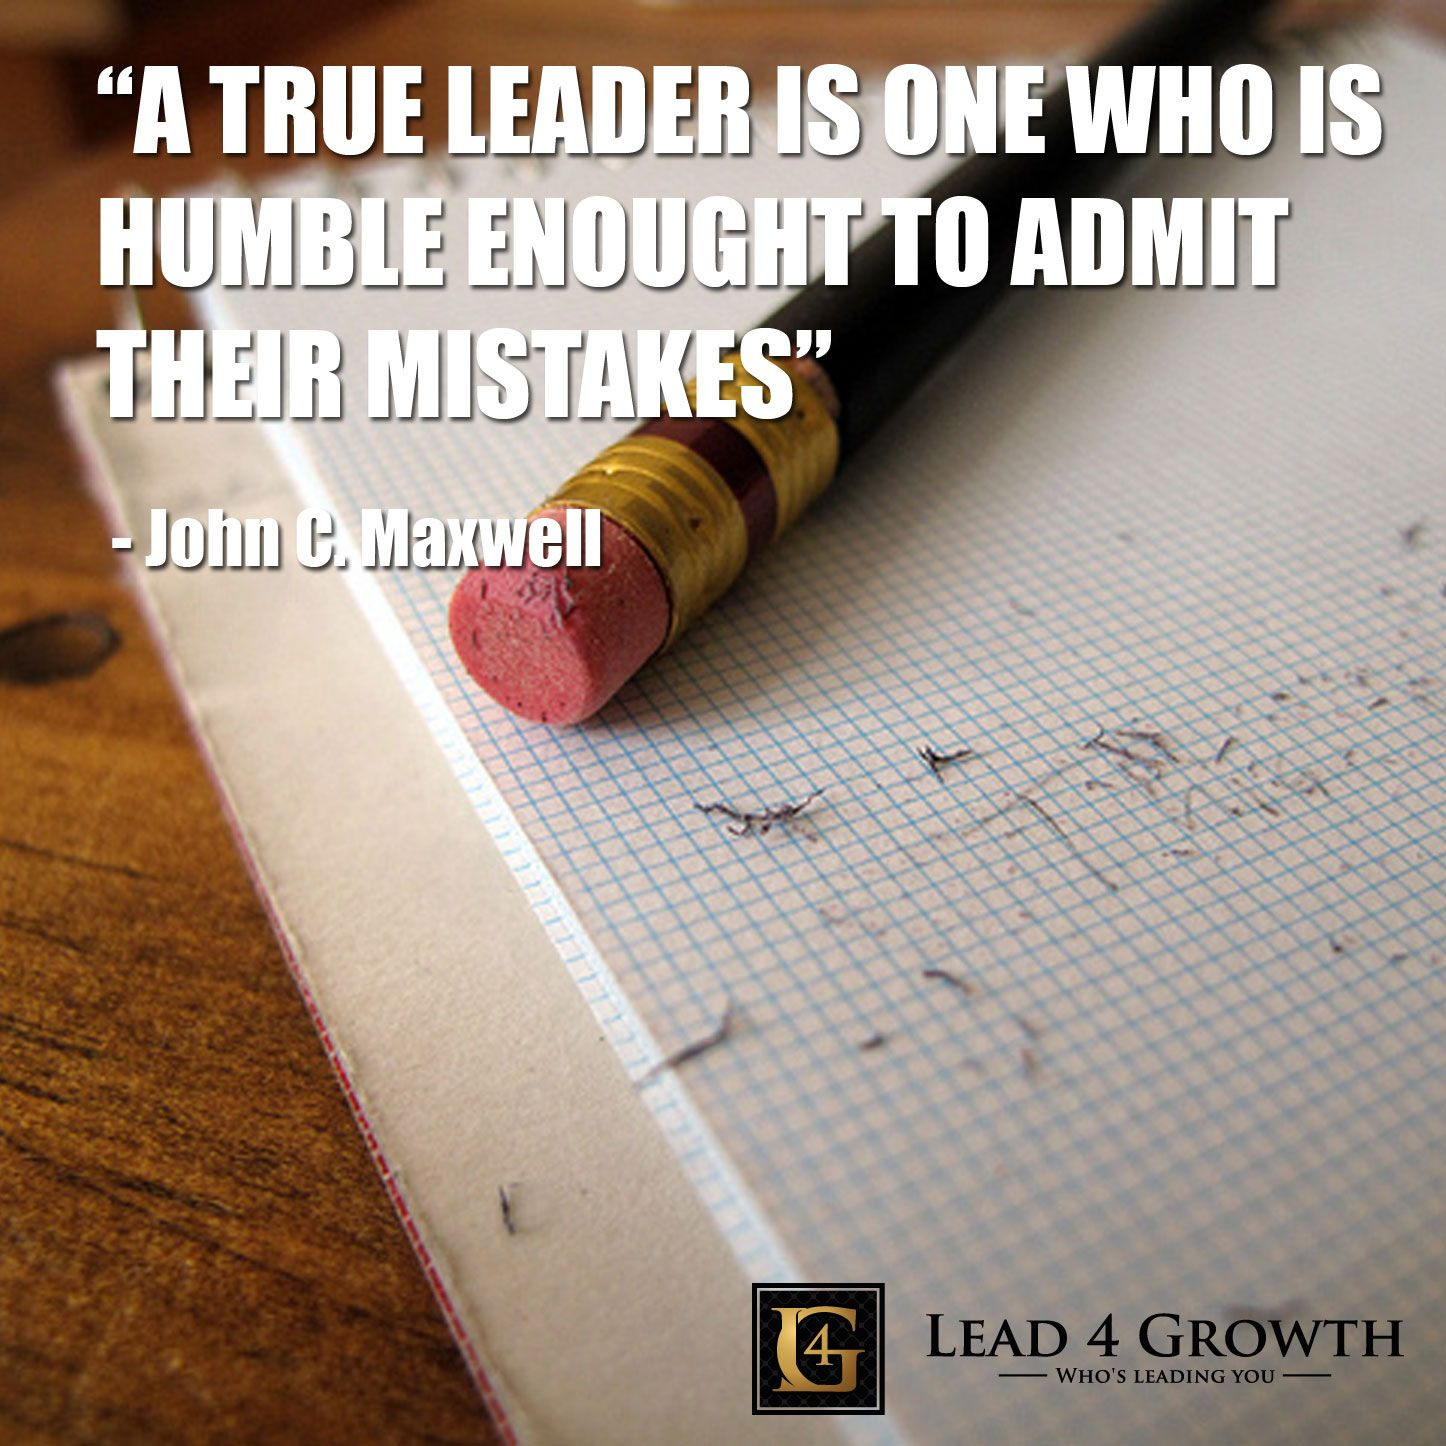 Humble Leadership Quotes
 A true leader is one who is humble enough to admit their